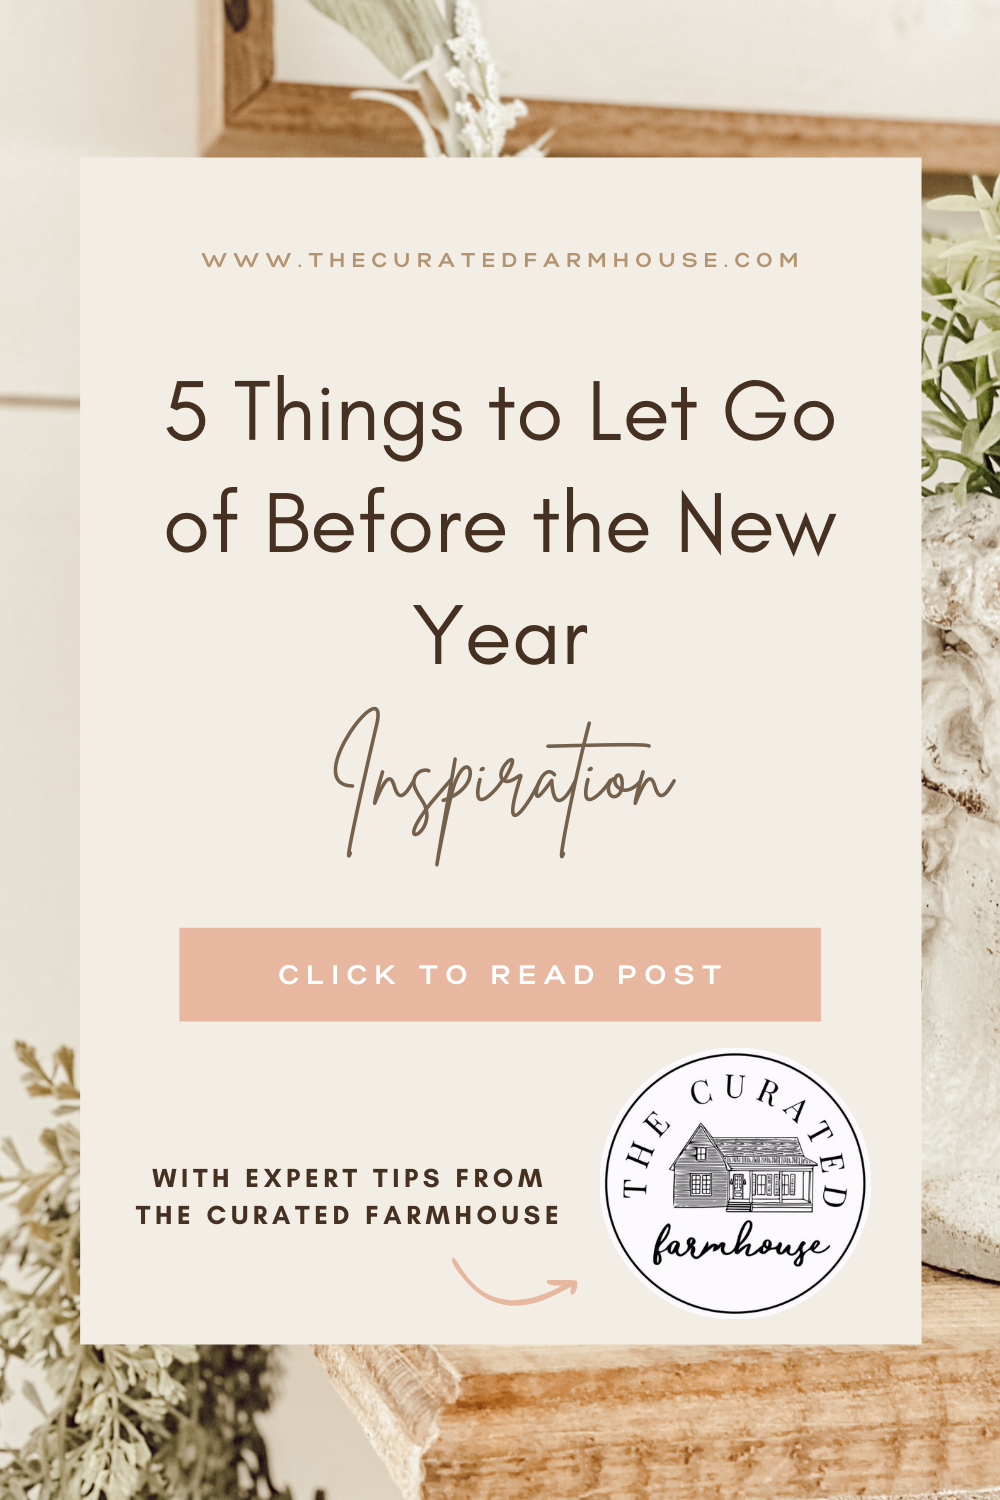 5 Things to Let Go of Before the New Year